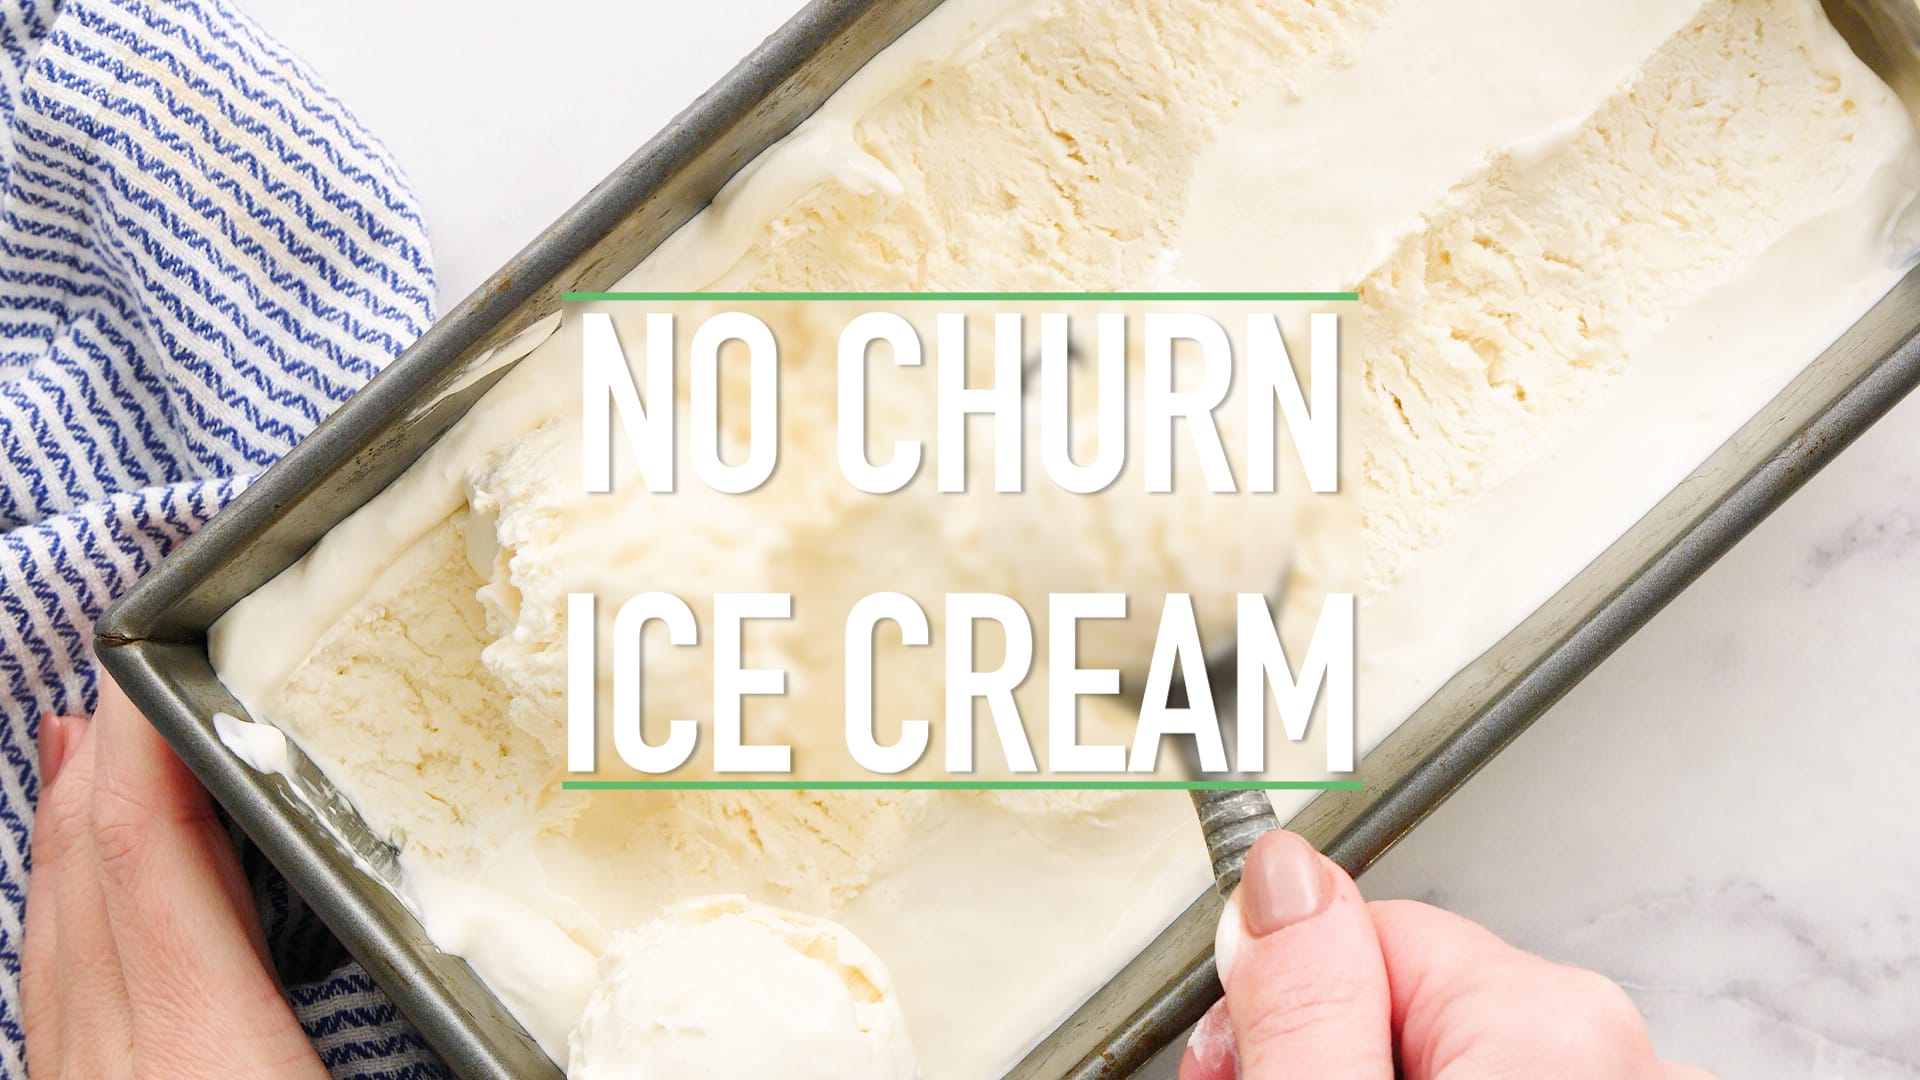 This 3-ingredient ice cream recipe comes together in less than 15